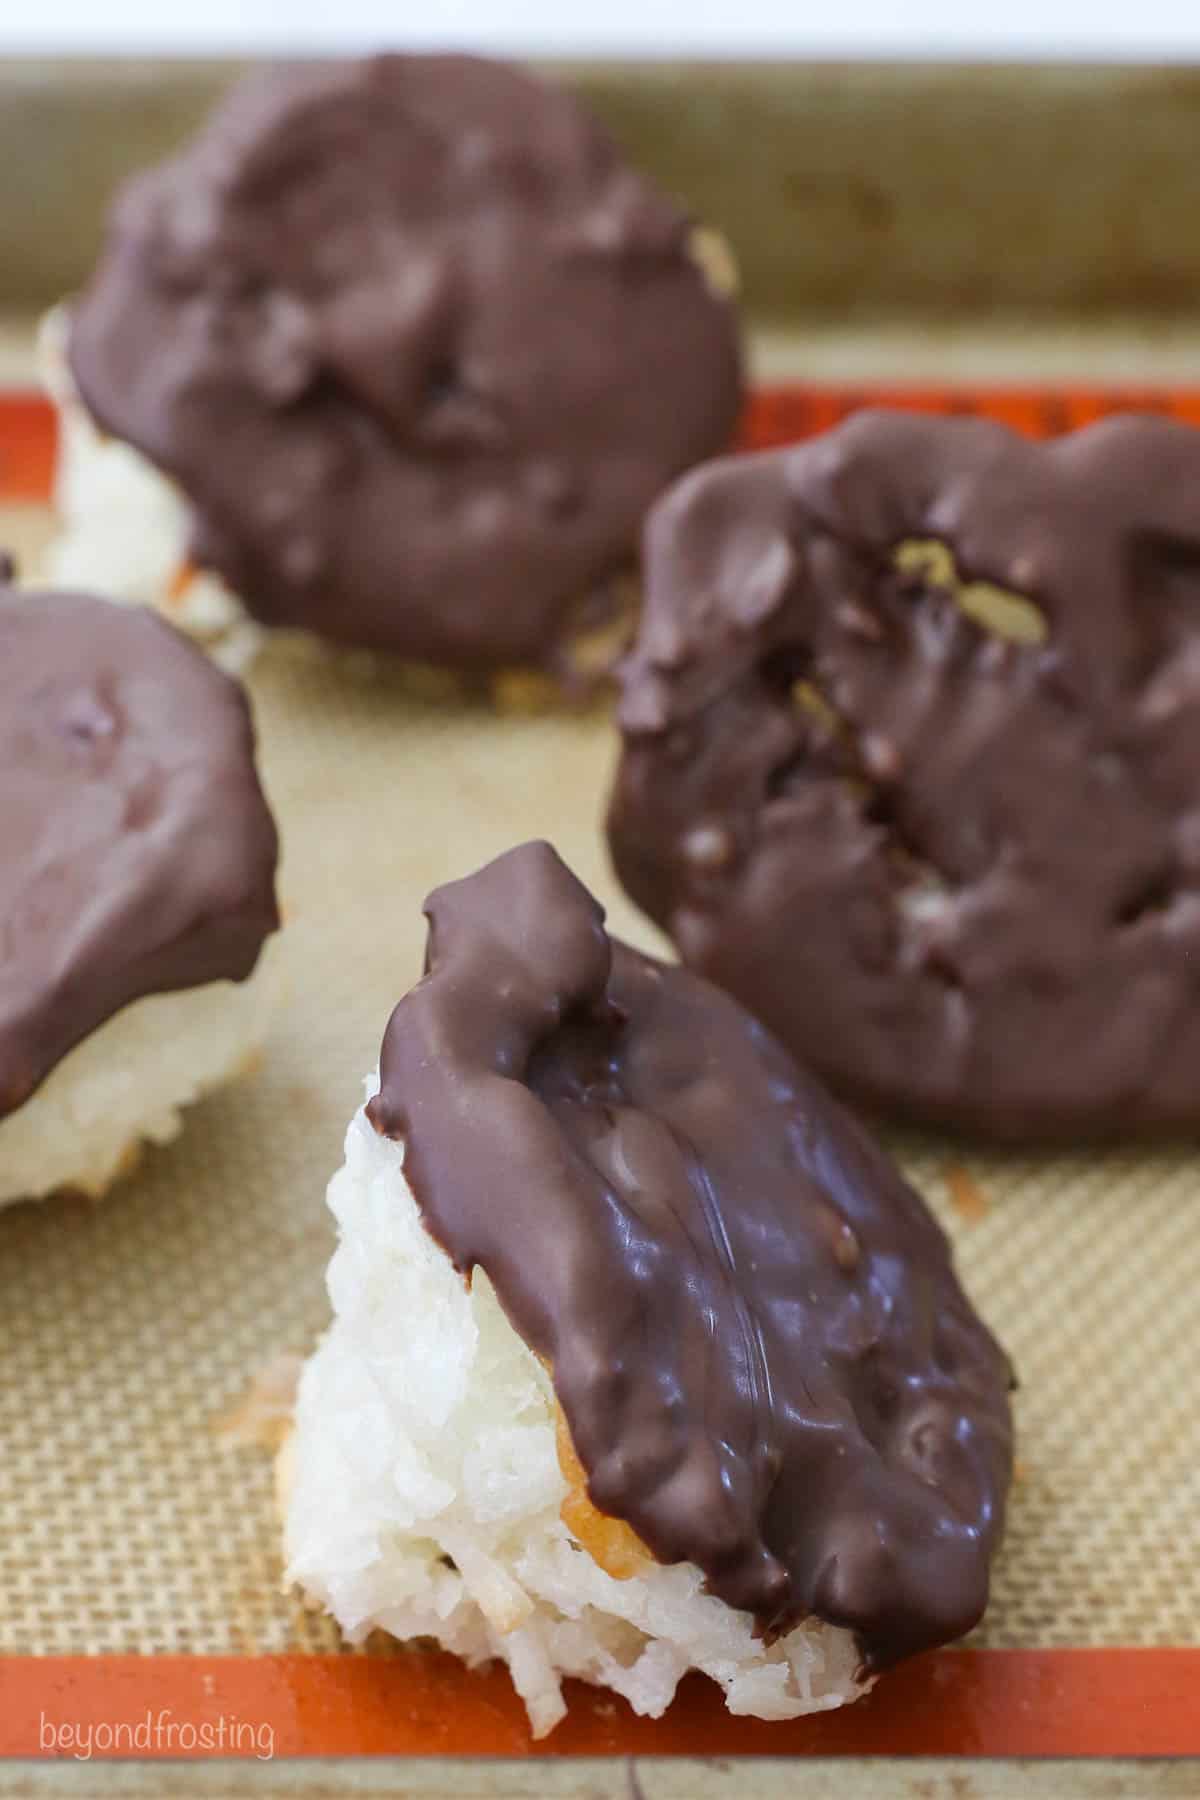 Chocolate-dipped macaroons laying on their sides on top of a silicone-lined baking sheet